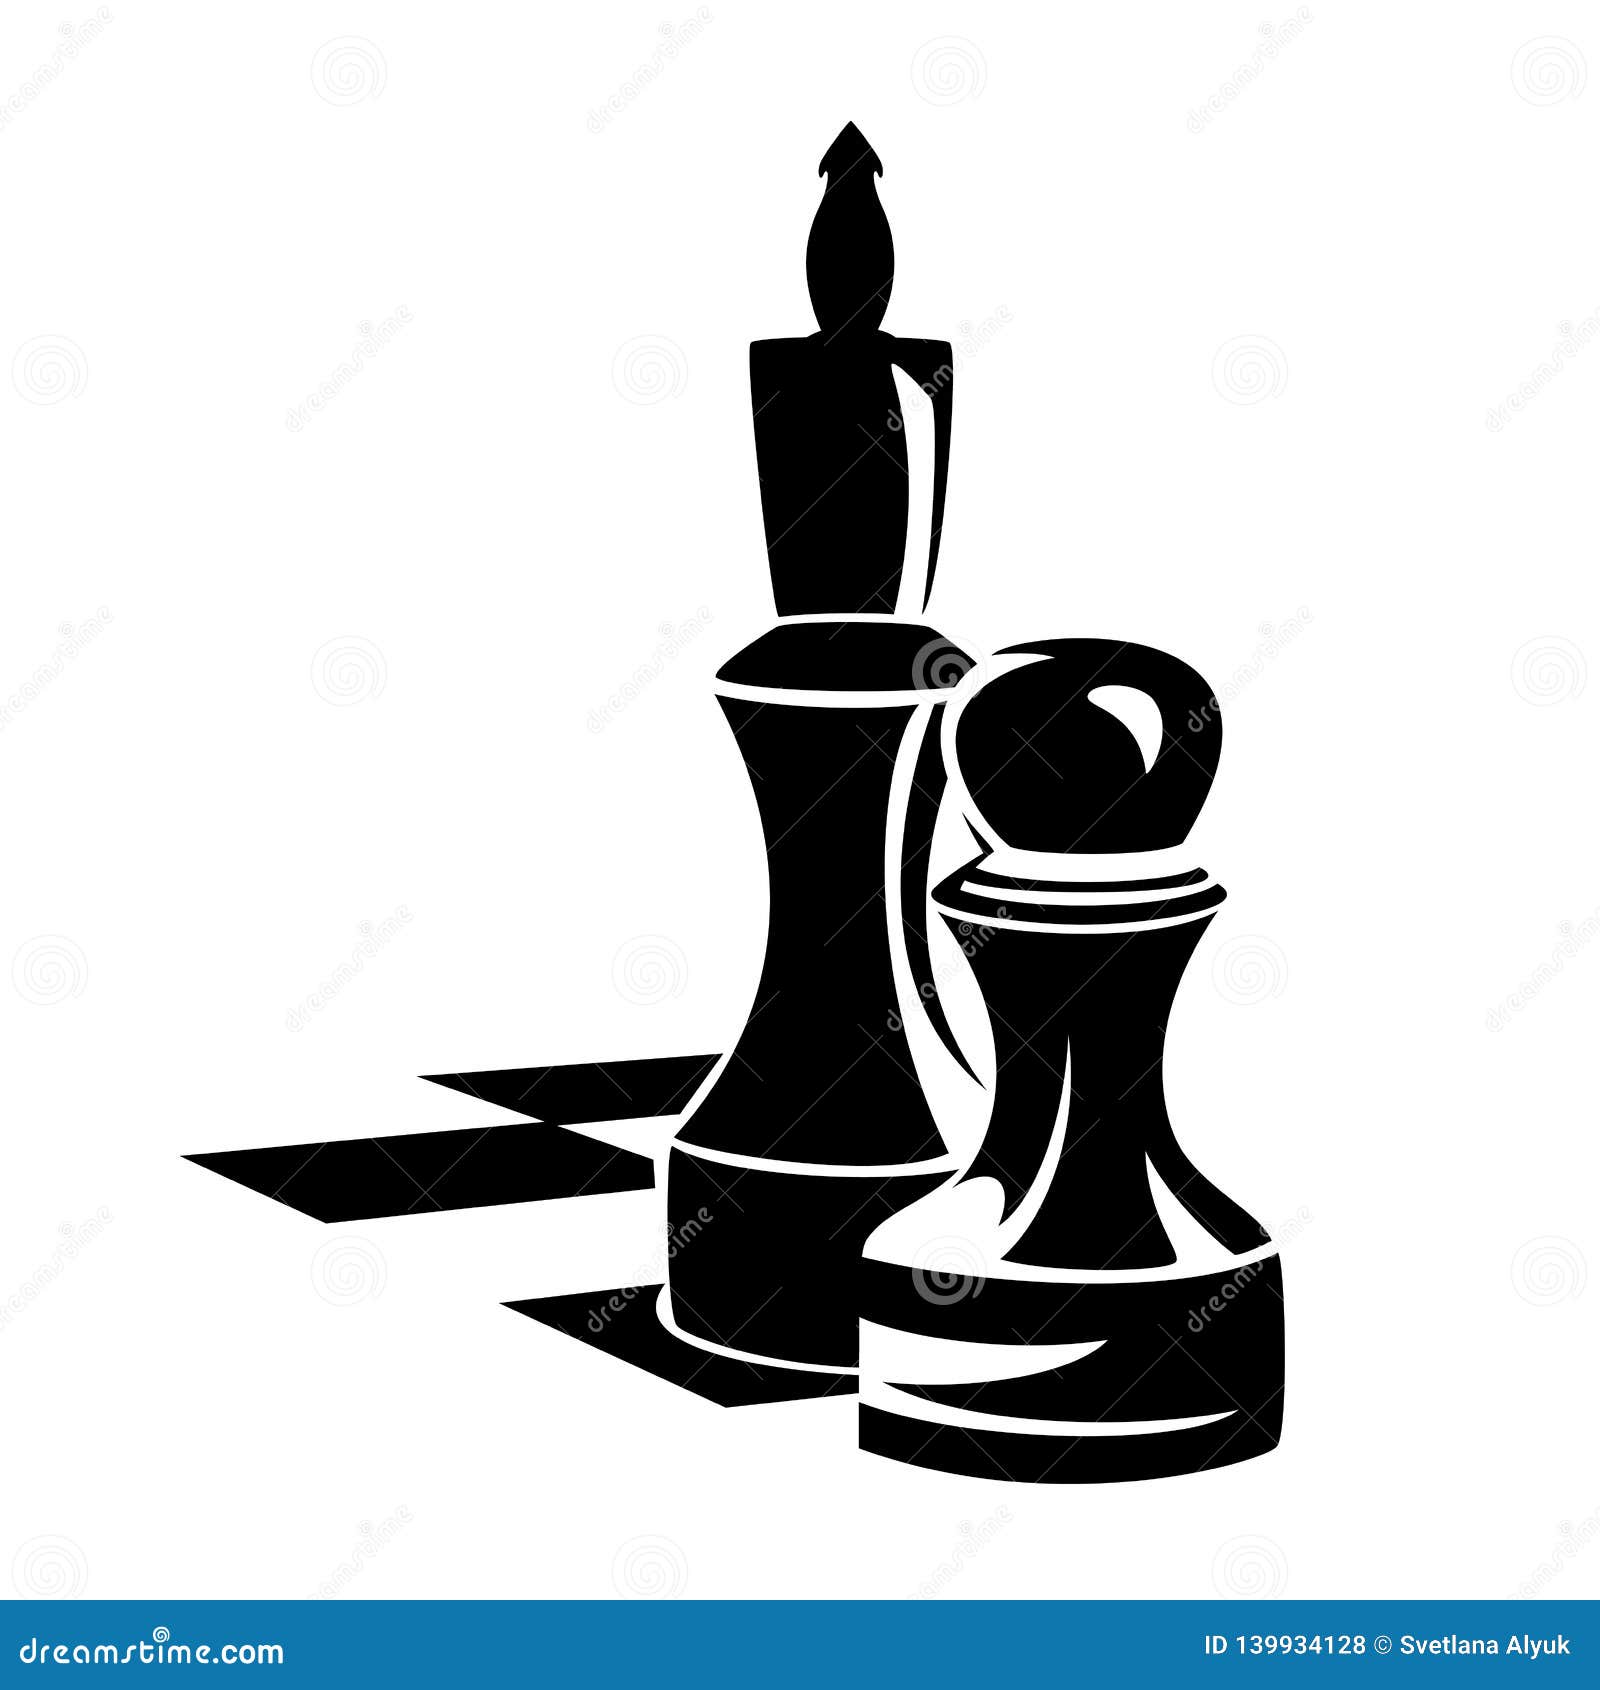 Pawns black and white chess pieces Royalty Free Vector Image